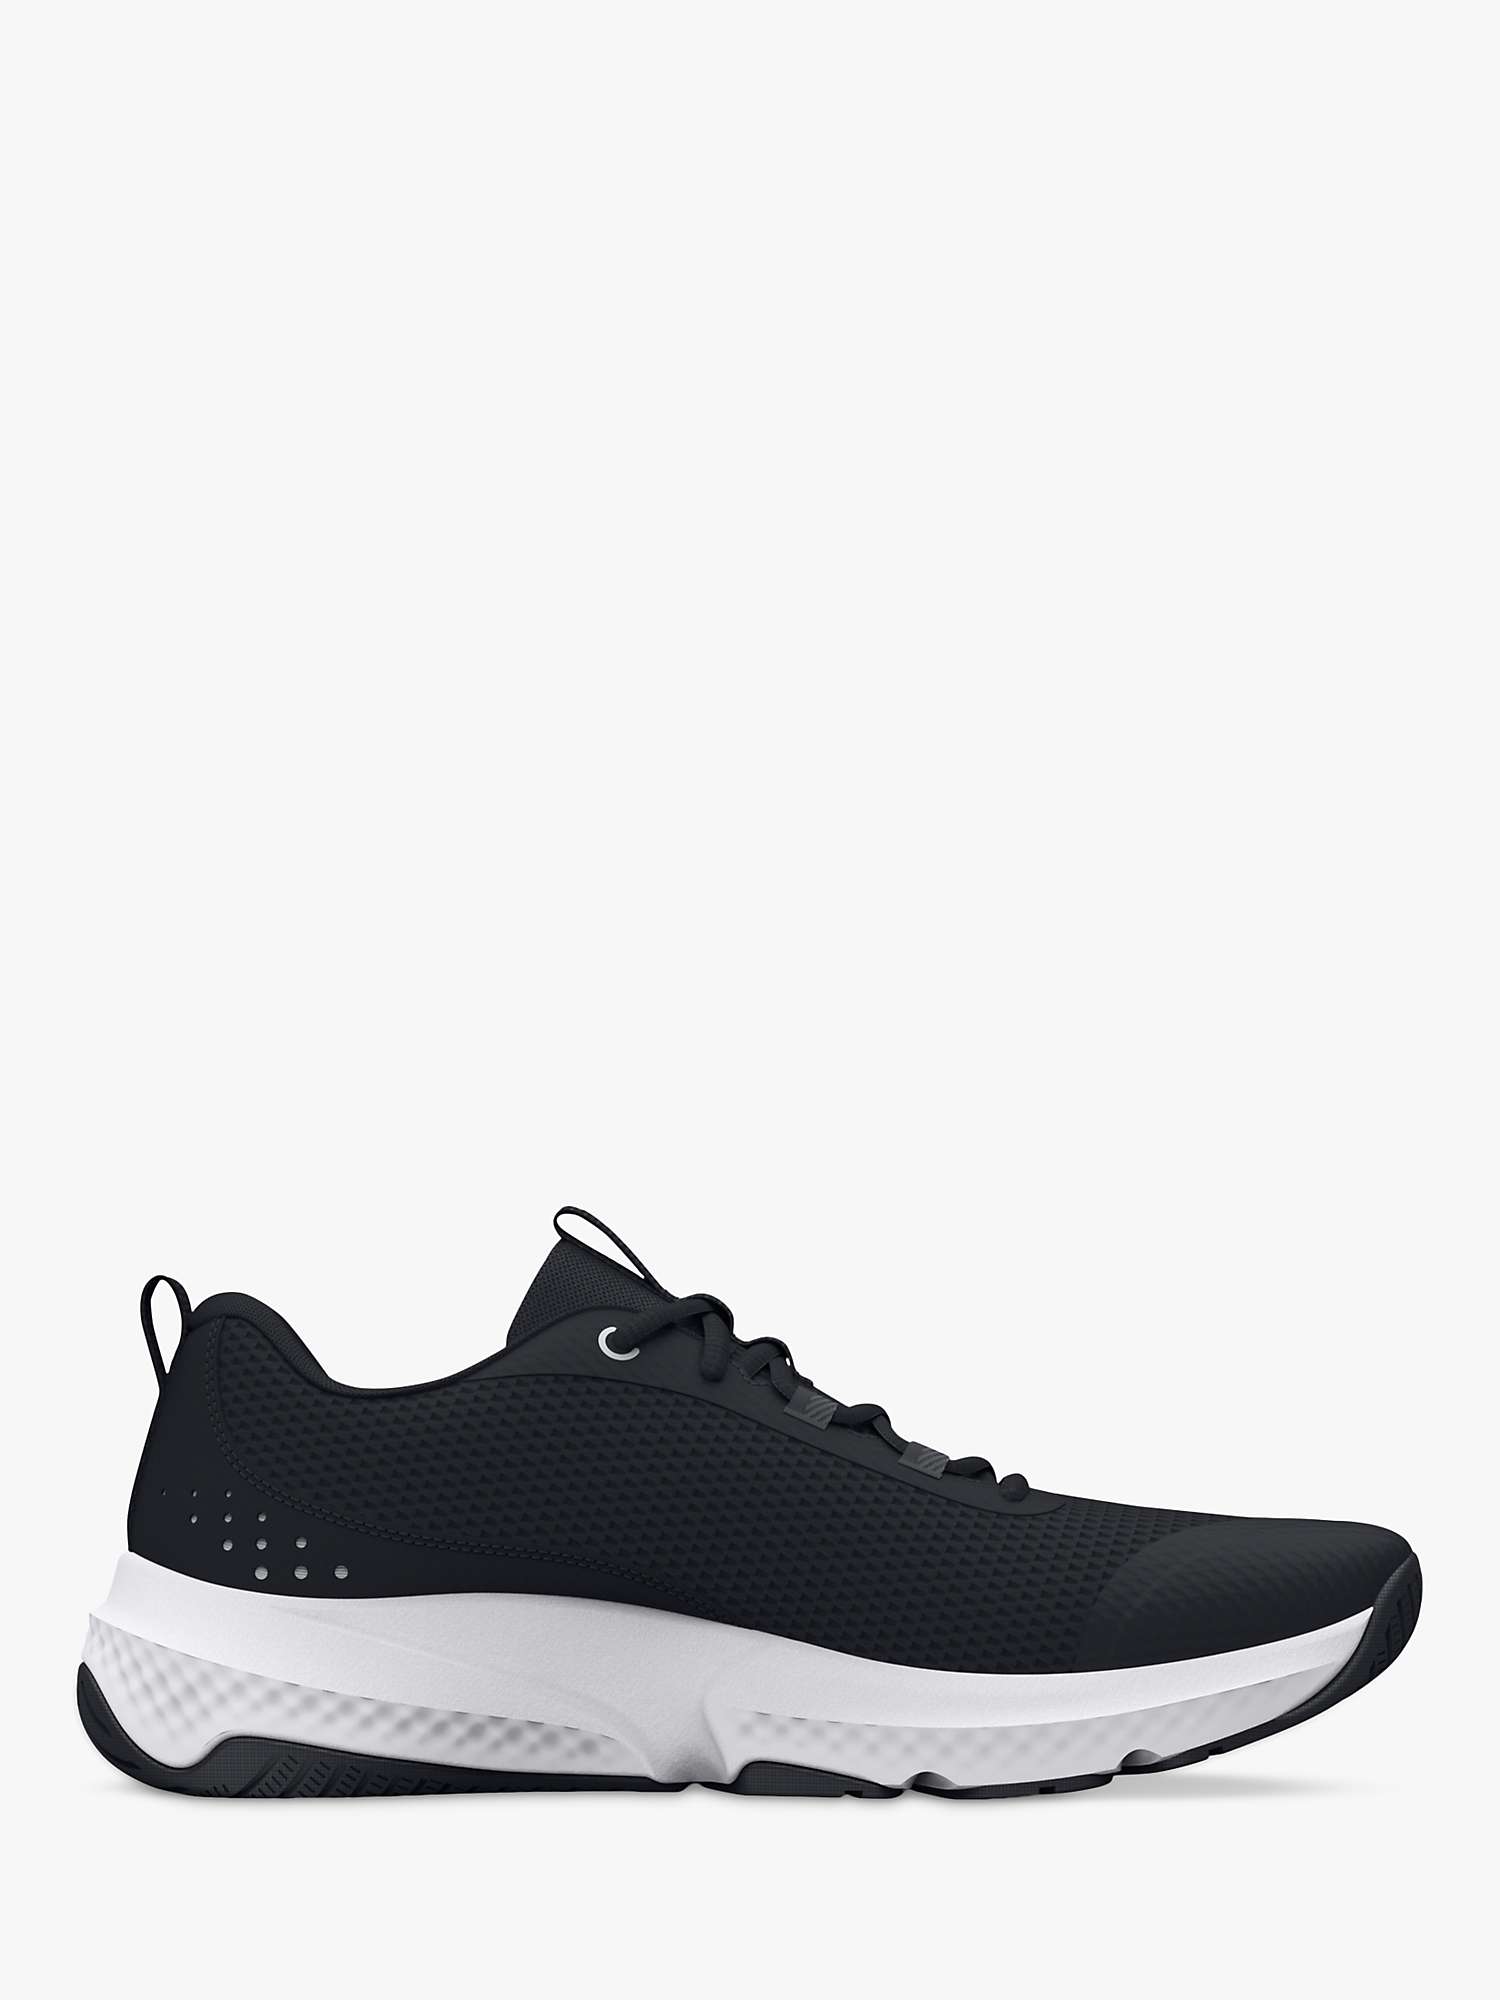 Under Armour Dynamic Select Women's Cross Trainers at John Lewis & Partners